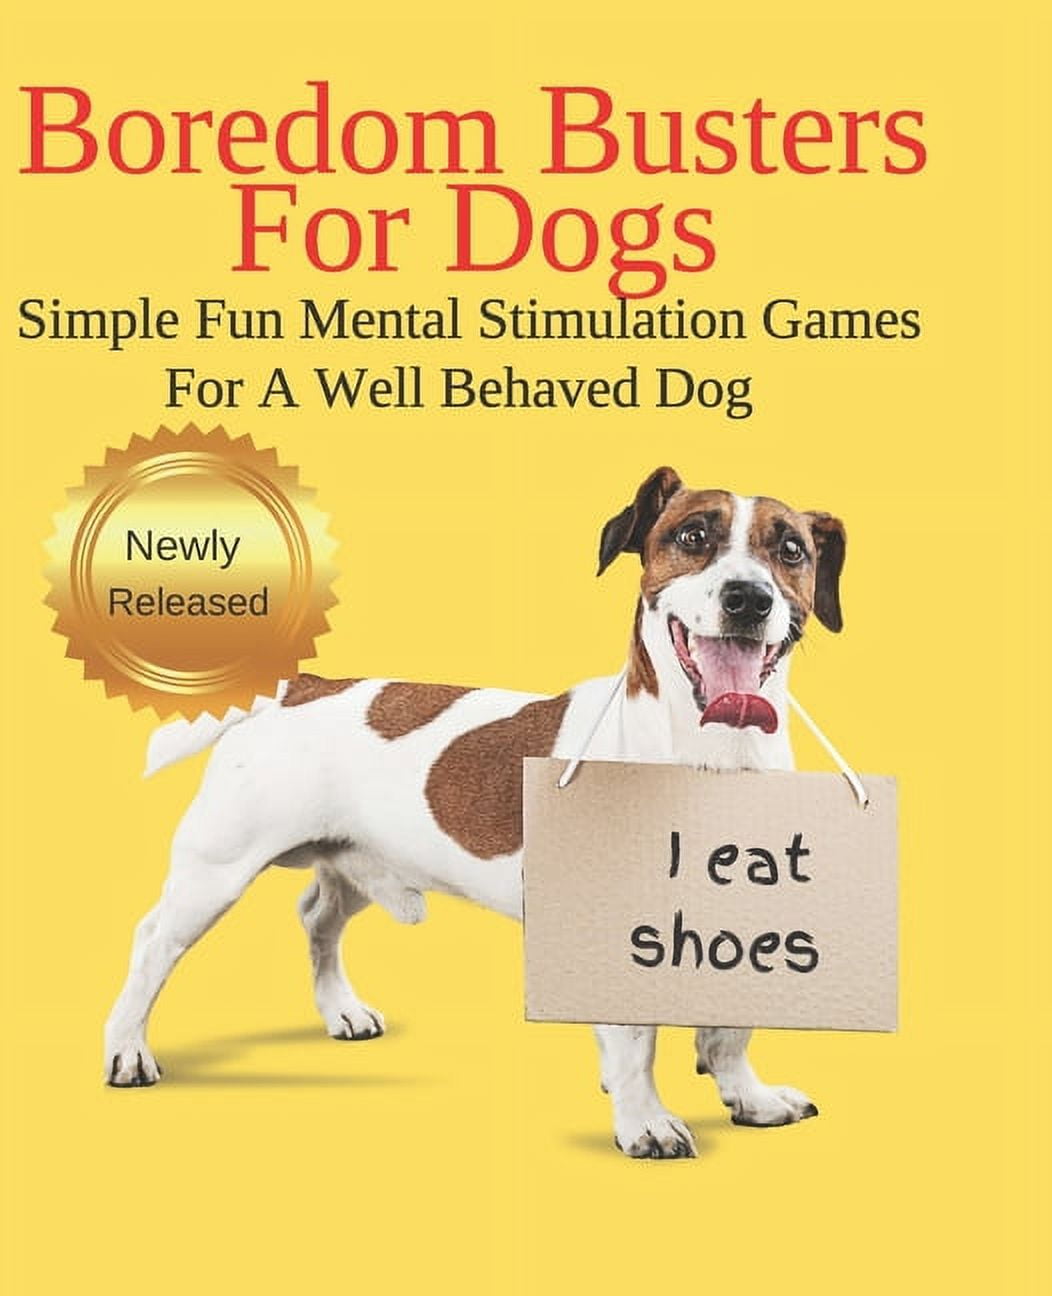 5 Incredible Mental Stimulation Games For Dogs., by Petperfect